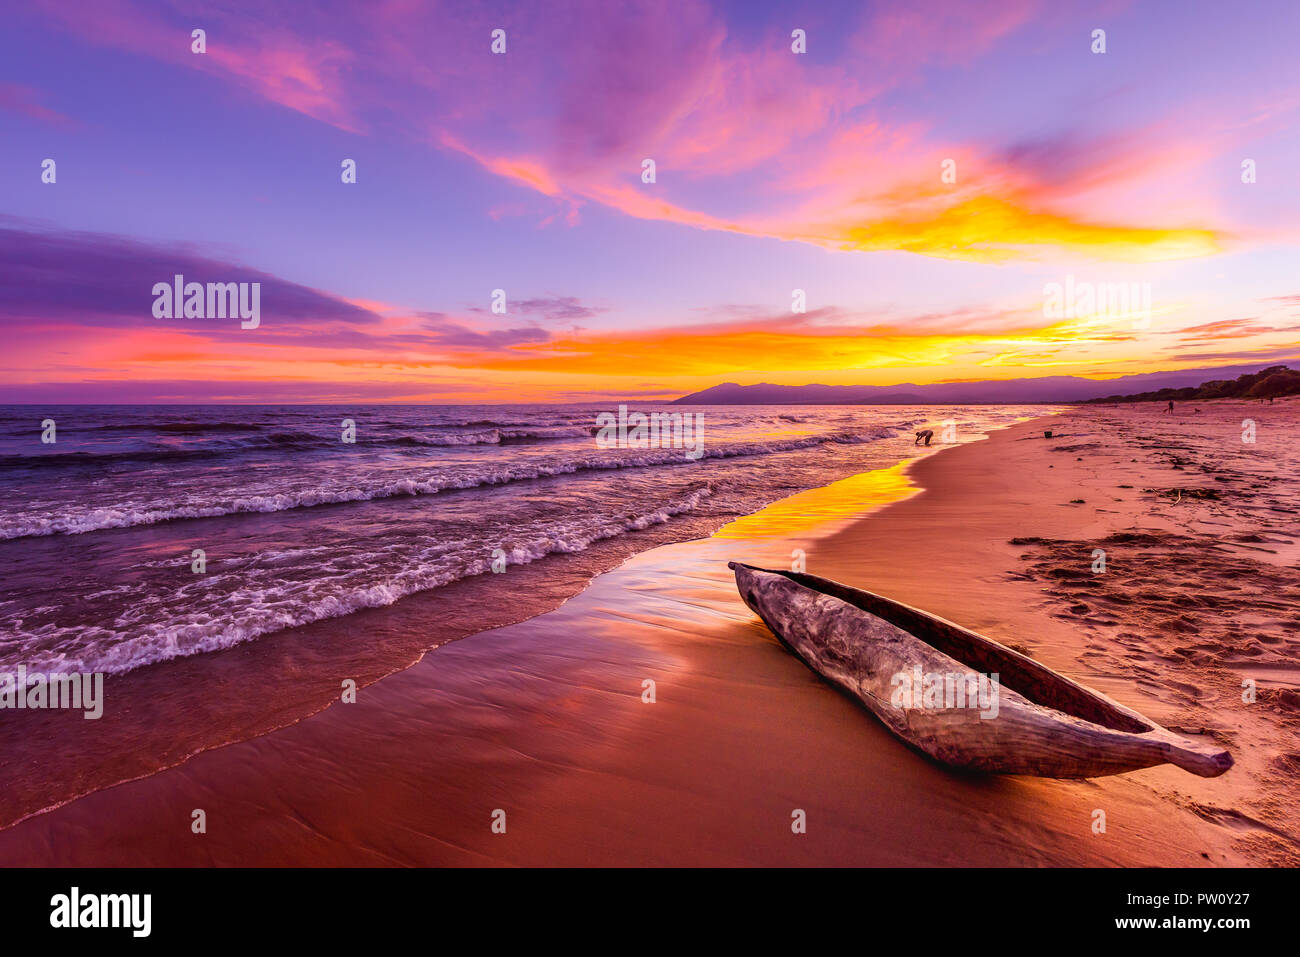 Lake Malawi sunset in Kande beach Africa, canoe boat on beach peaceful beach holiday beautiful sunset colors blue purple orange yellow in sky and clou Stock Photo